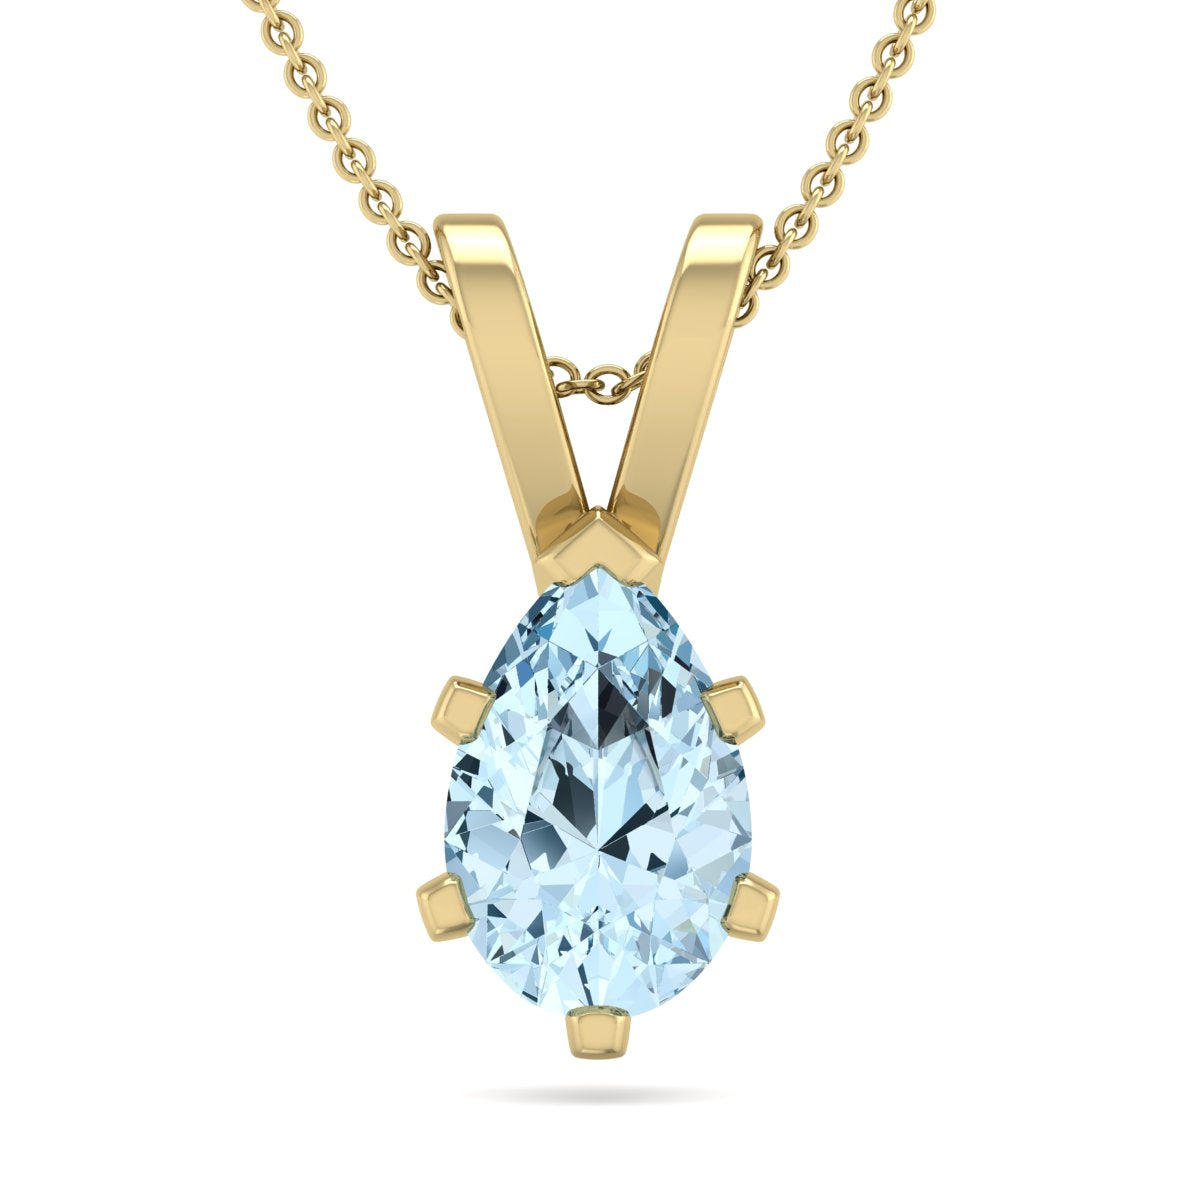 Sselects 3/4 Carat Pear Shape Aquamarine Necklace In 14k Yellow Over Sterling Silver In Gold